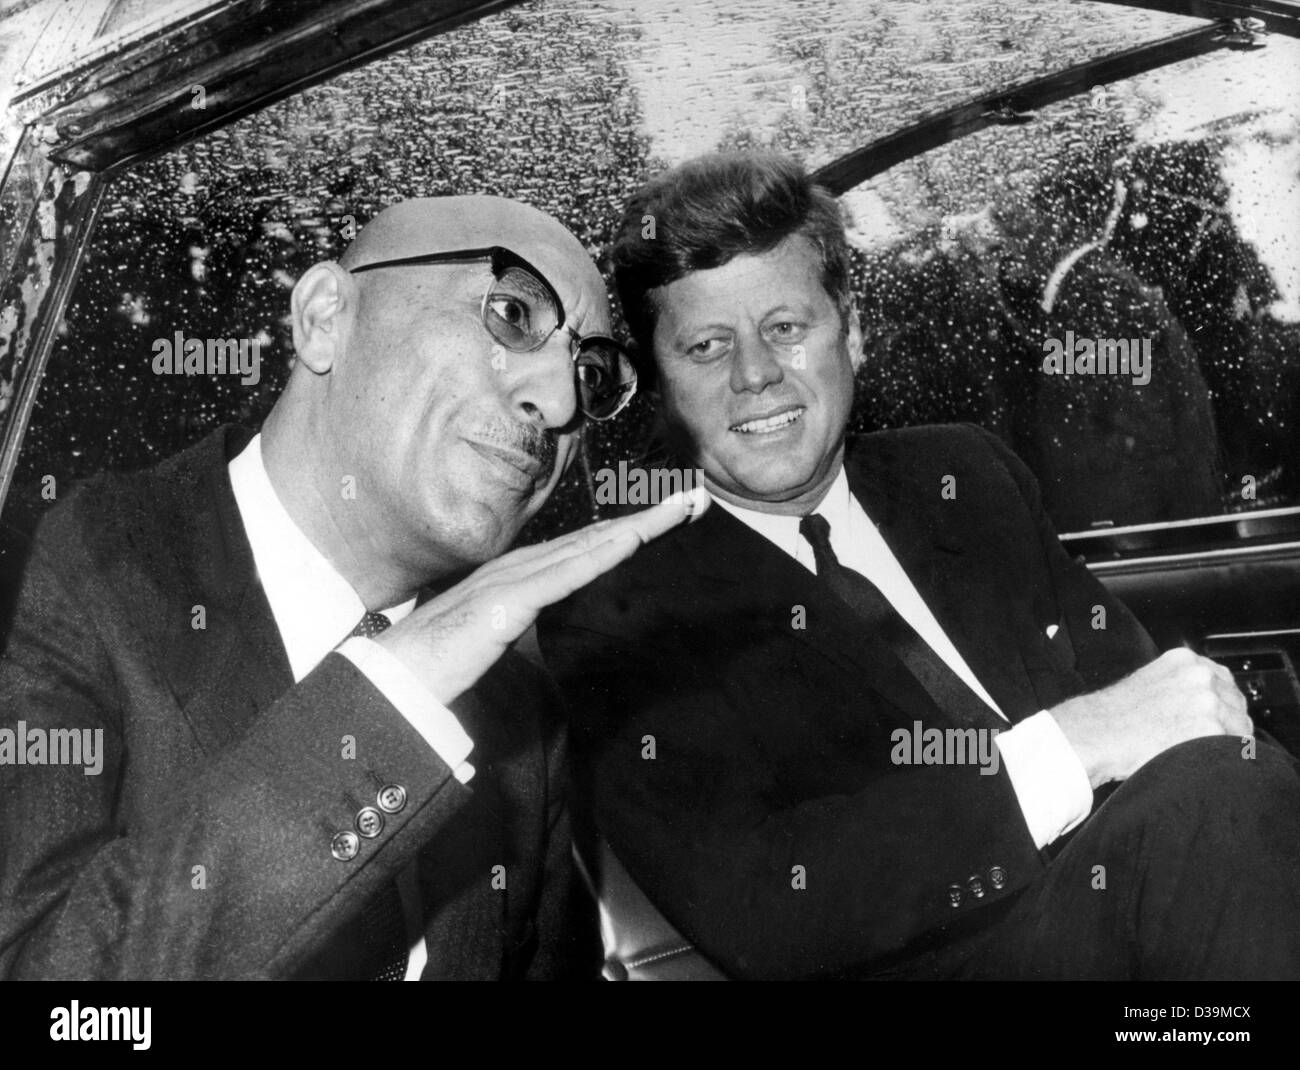 (dpa files) - US-President John F. Kennedy (R) with his guest, King Mohammed Zahir Shah (L) in a limousine after the Shah's arrival in Washington, D.C. on 6 September 1963. Zahir Shah became King of Afghanistan at the age of 19 after his father died in an assassination in 1933. On 17 July 1973 King  Stock Photo